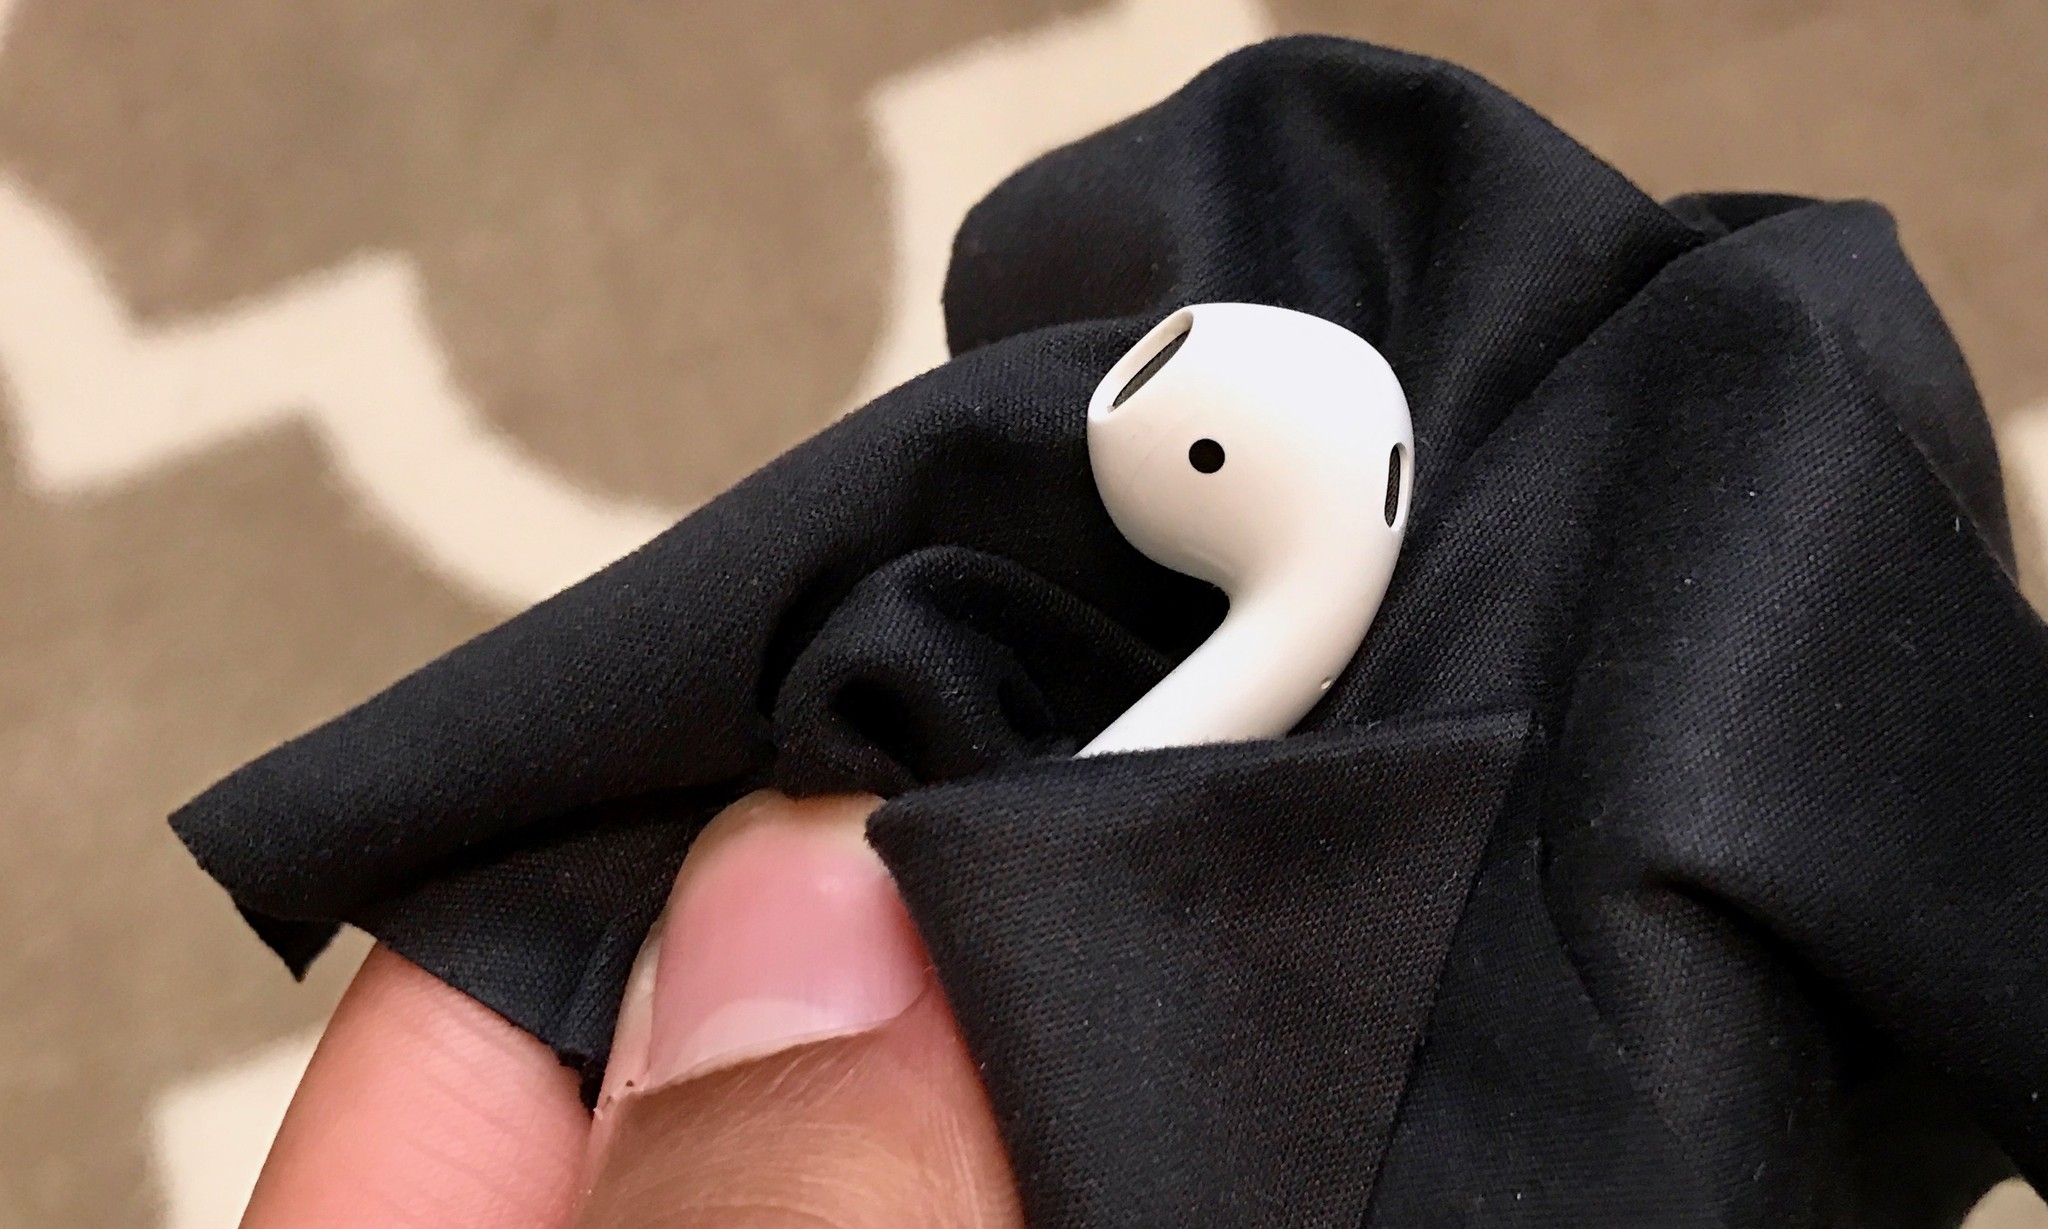 Cleaning your AirPods